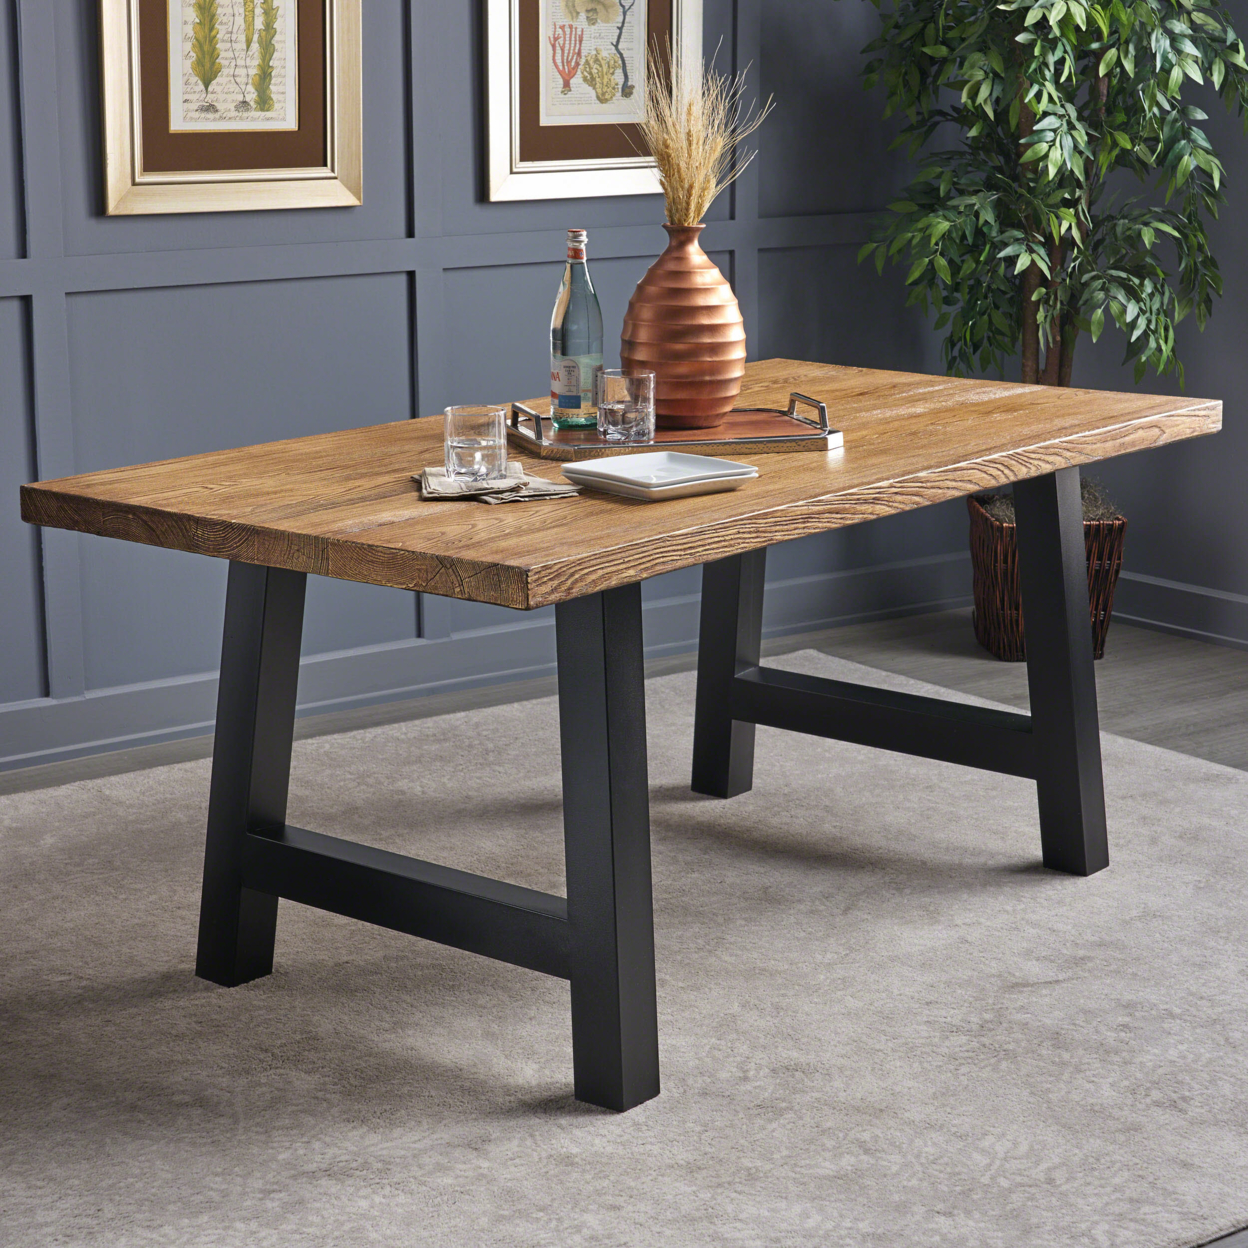 Edward Indoor Light Weight Concrete Dining Table - Natural Gray